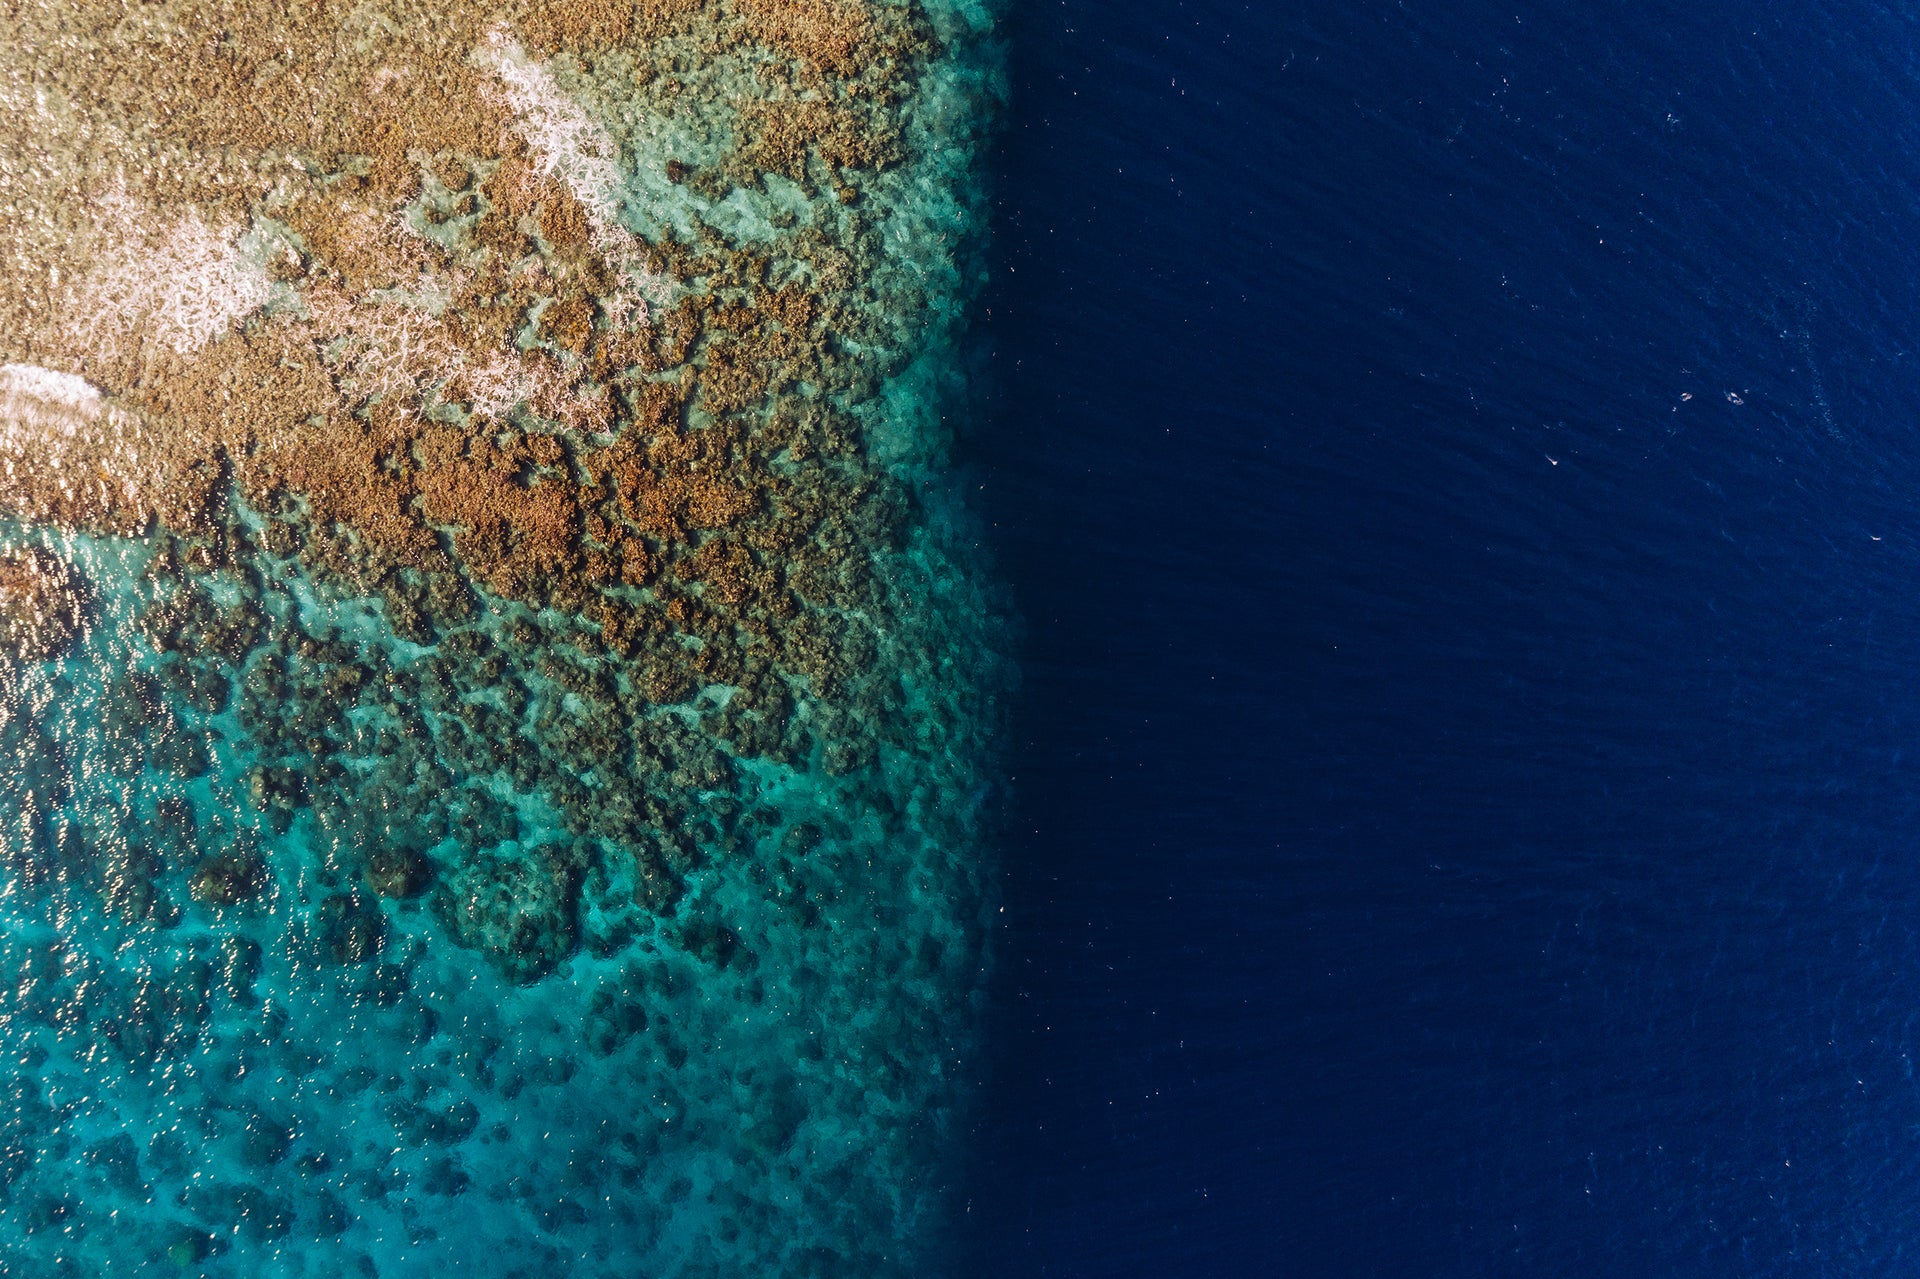 Opening image: At two degrees of warming, 90 per cent of the world’s coral reefs will be gone. We’re on the verge of overshooting 1.5 degrees right now. It’s time to get serious. Photo Jarrah Lynch